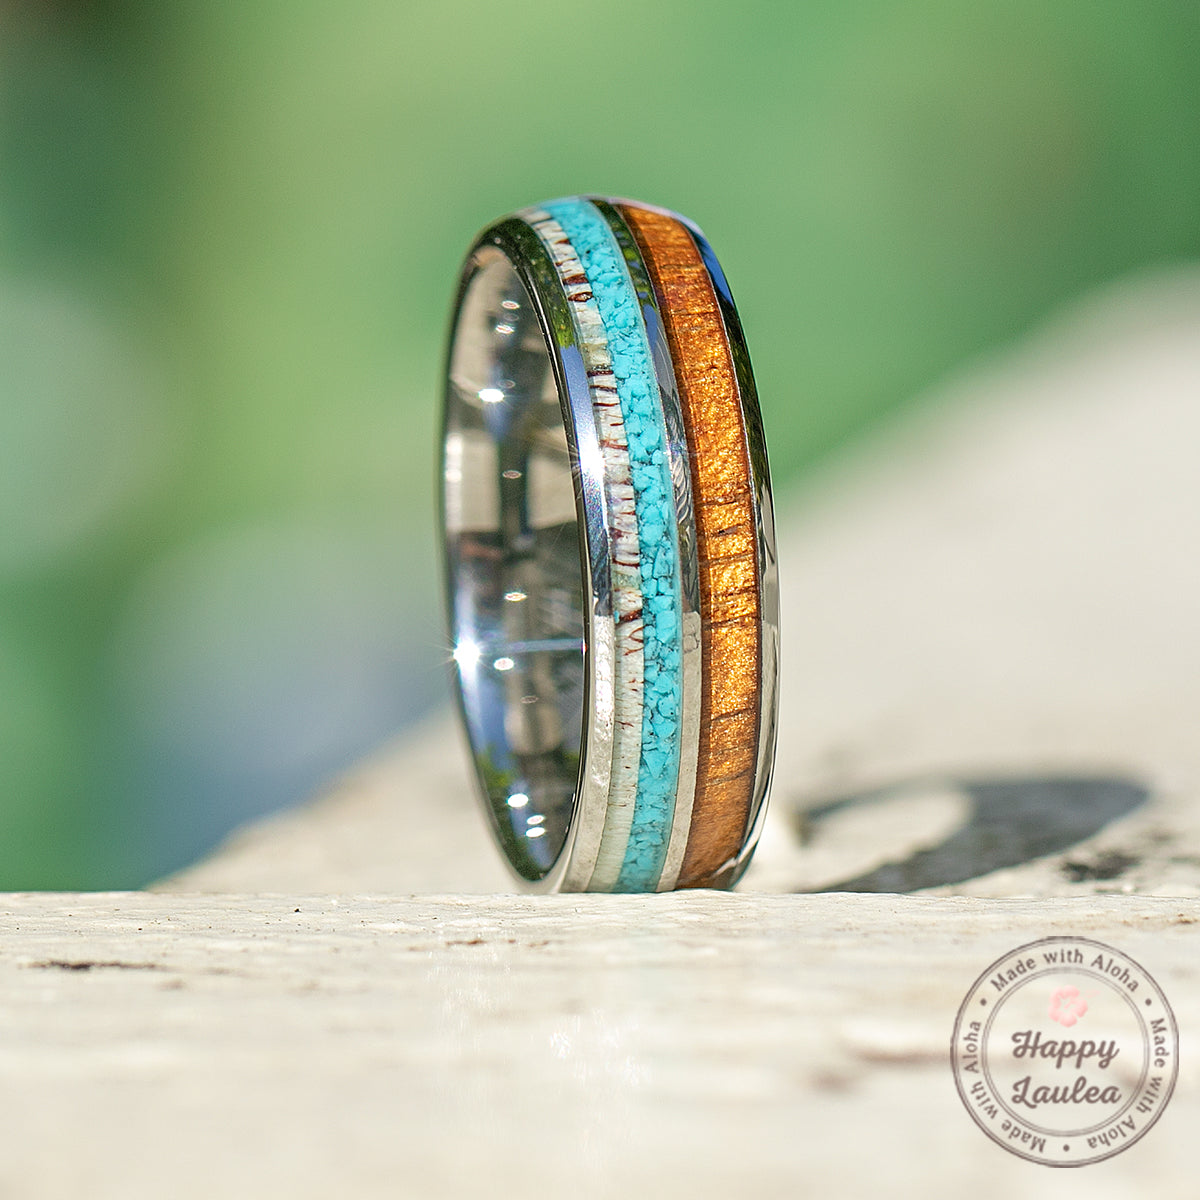 Tungsten Carbide with Antler, Turquoise, & Hawaiian Koa Wood - 6mm, Dome Shape, Comfort Fitment